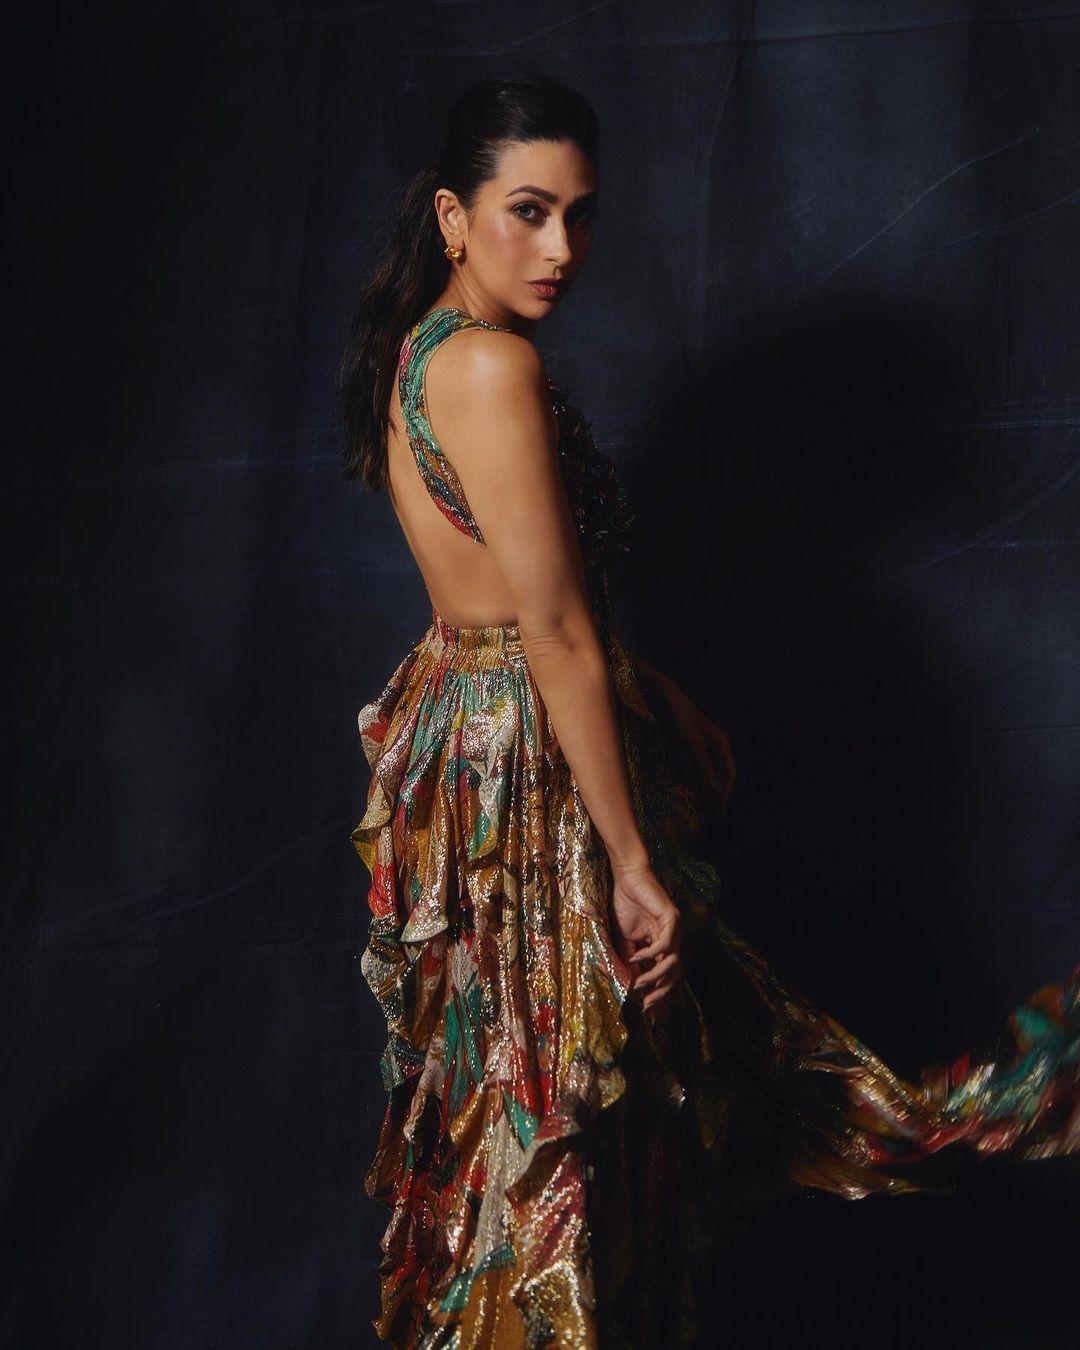 Kapoor donned a stunning backless maxi gown crafted from shimmering golden lurex fabric. The gown featured flowing ruffles and was adorned with Gill’s signature Begonia print. She topped off the look with a golden sequin jacket embellished with hand-embroidered 3D floral appliqués and intricate crystal work.